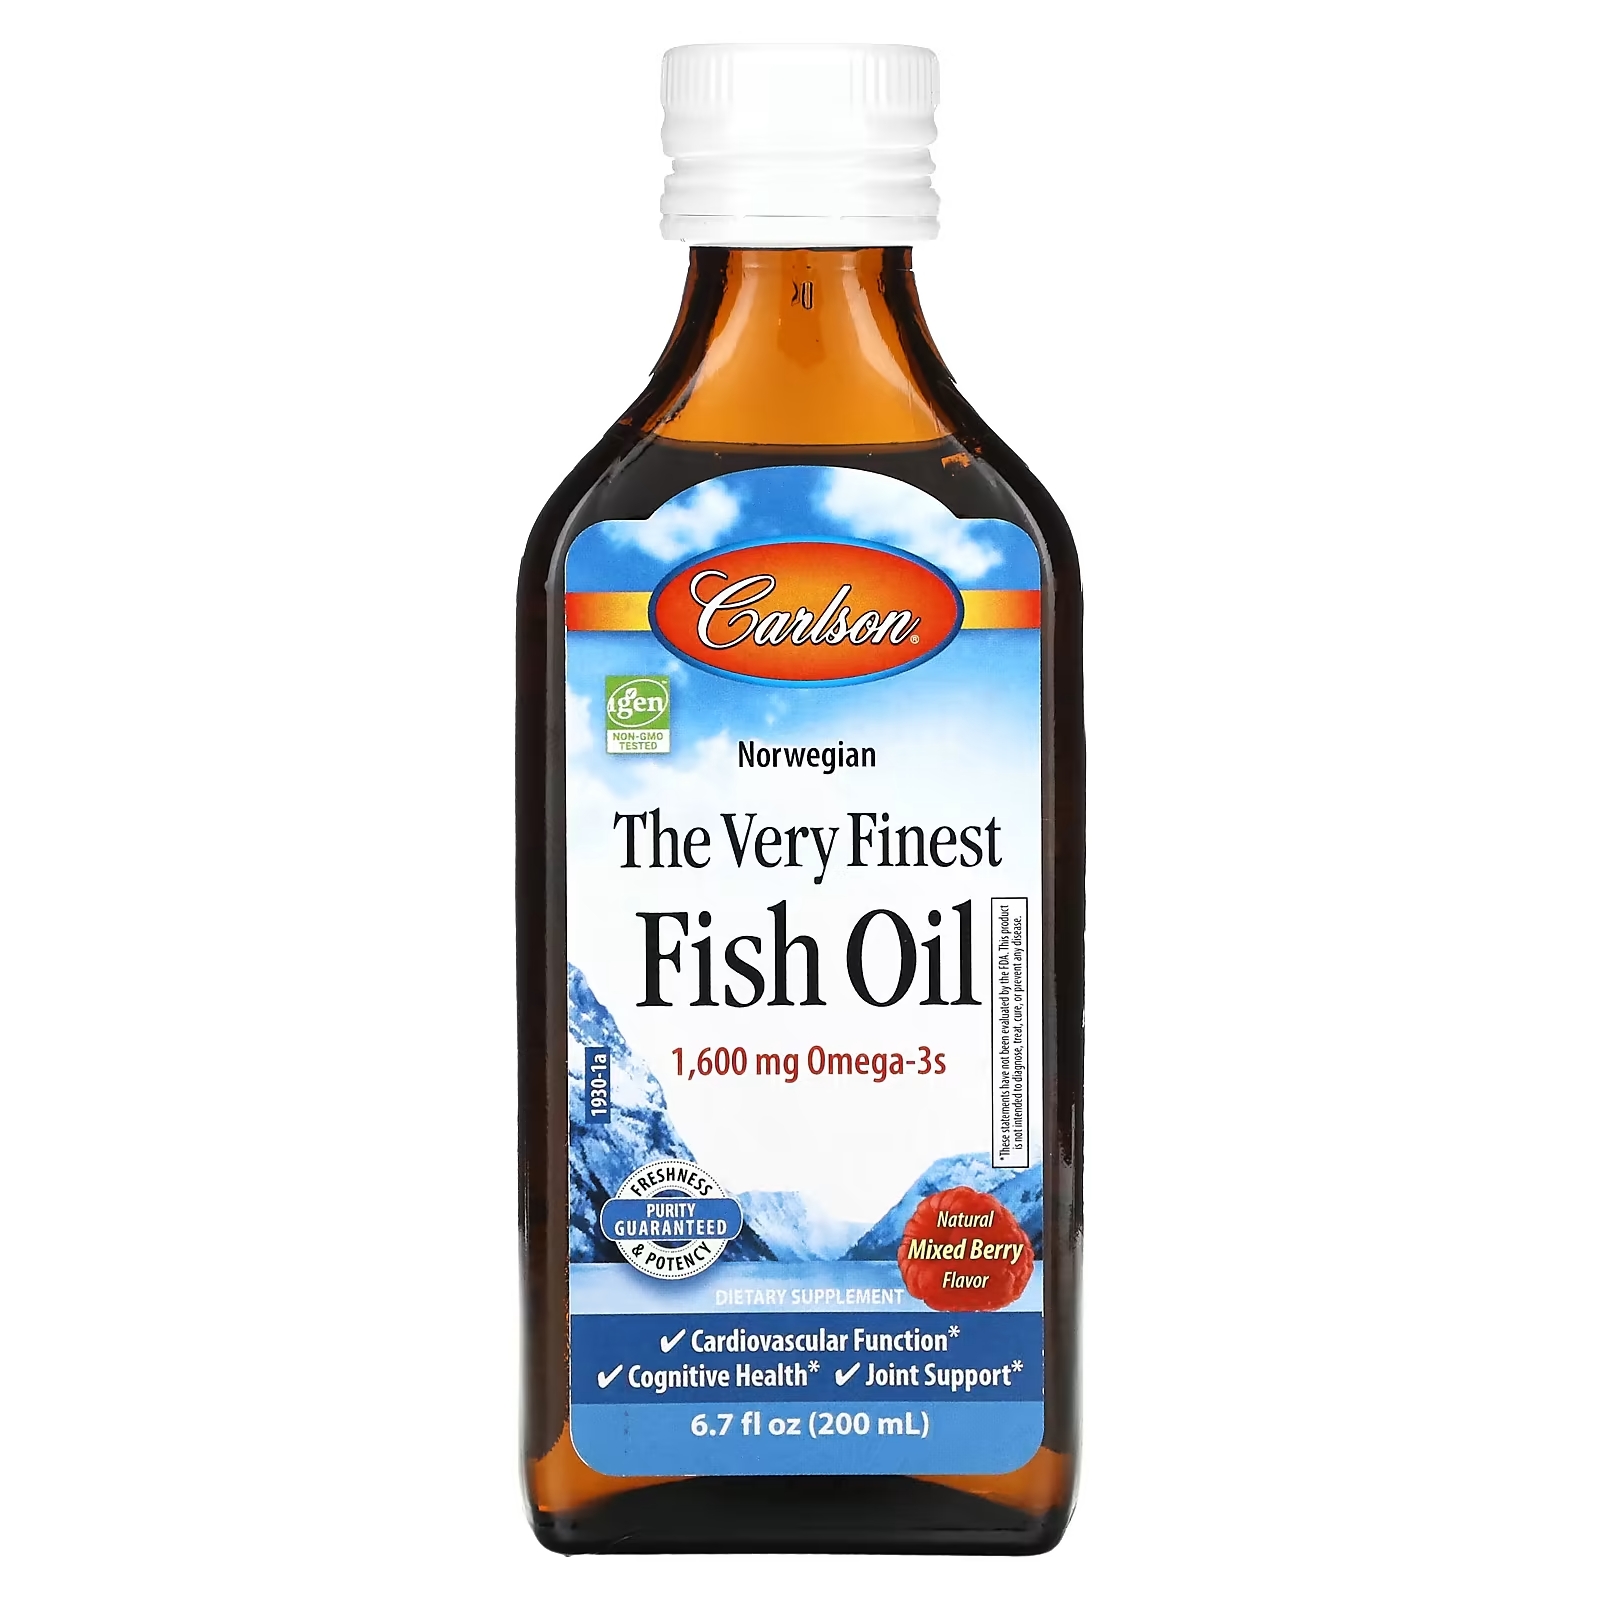 Carlson Norwegian The Very Finest Fish Oil Natural Mixed Berry 1,600 mg, 200 мл carlson kids norwegian the very finest fish oil just peachie 800 mg 6 7 fl oz 200 ml